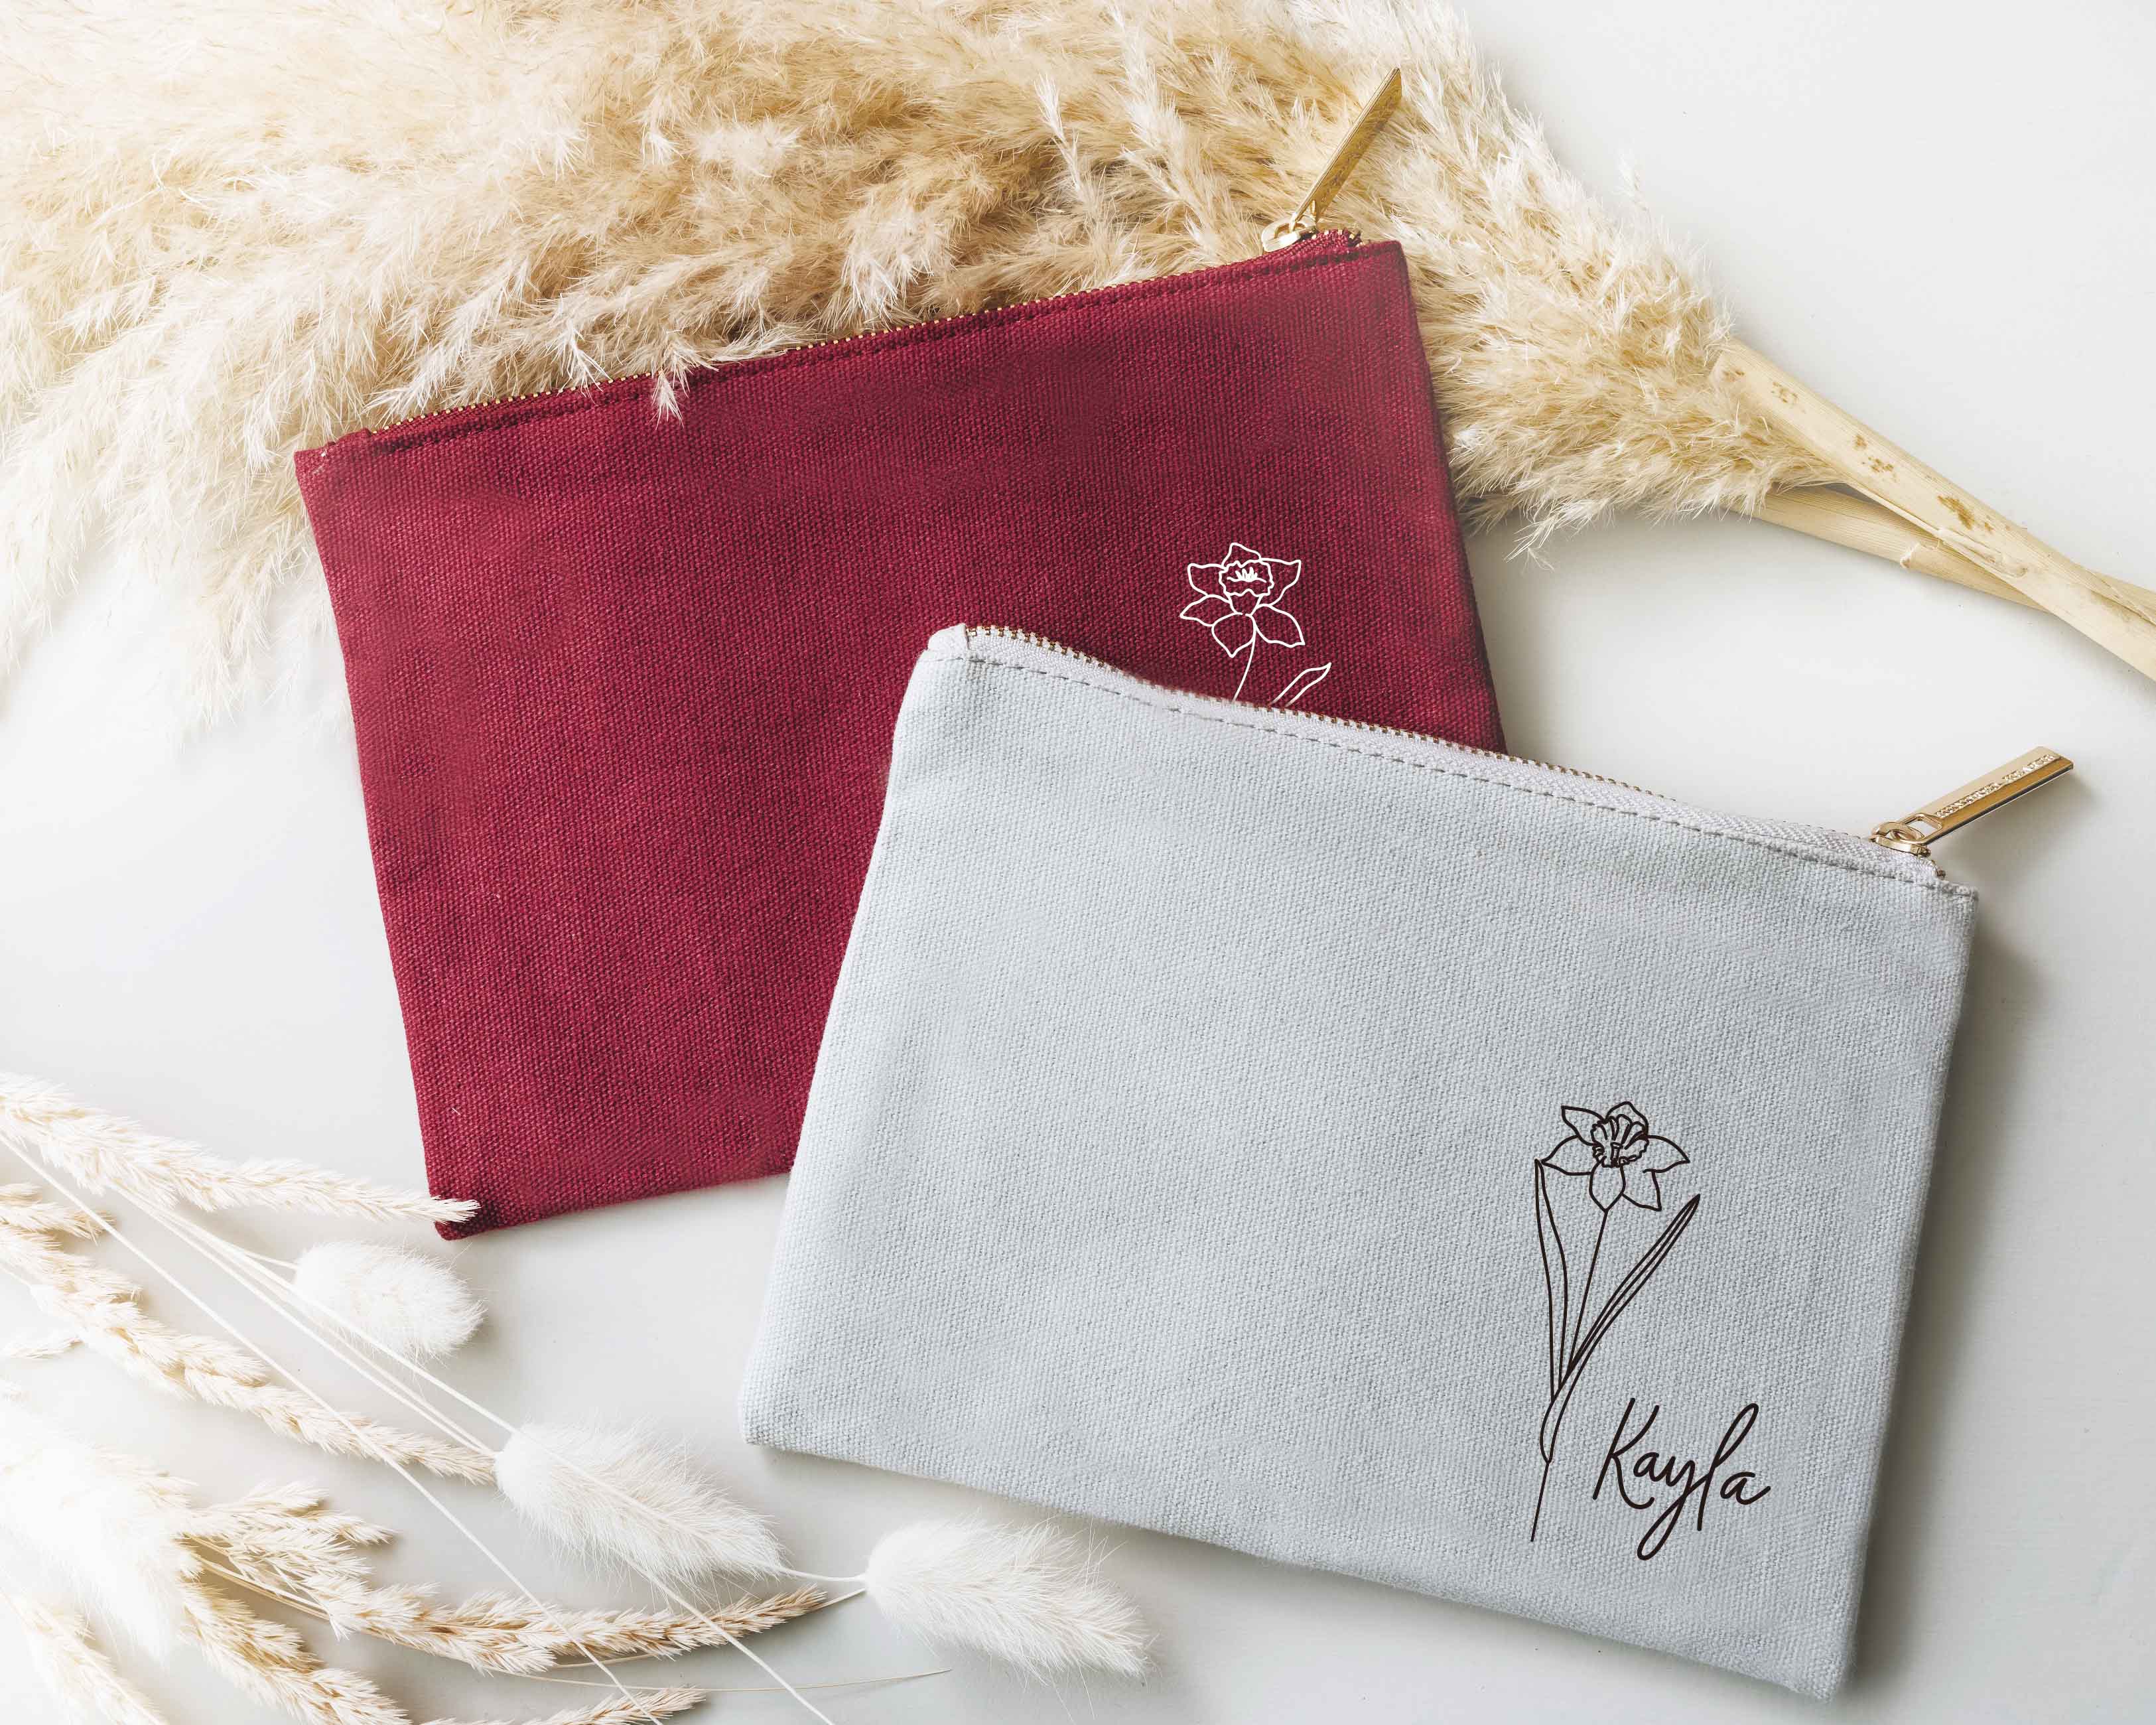 Cranberry and Grey Personalized Cosmetic Bags with birth flower image and name.